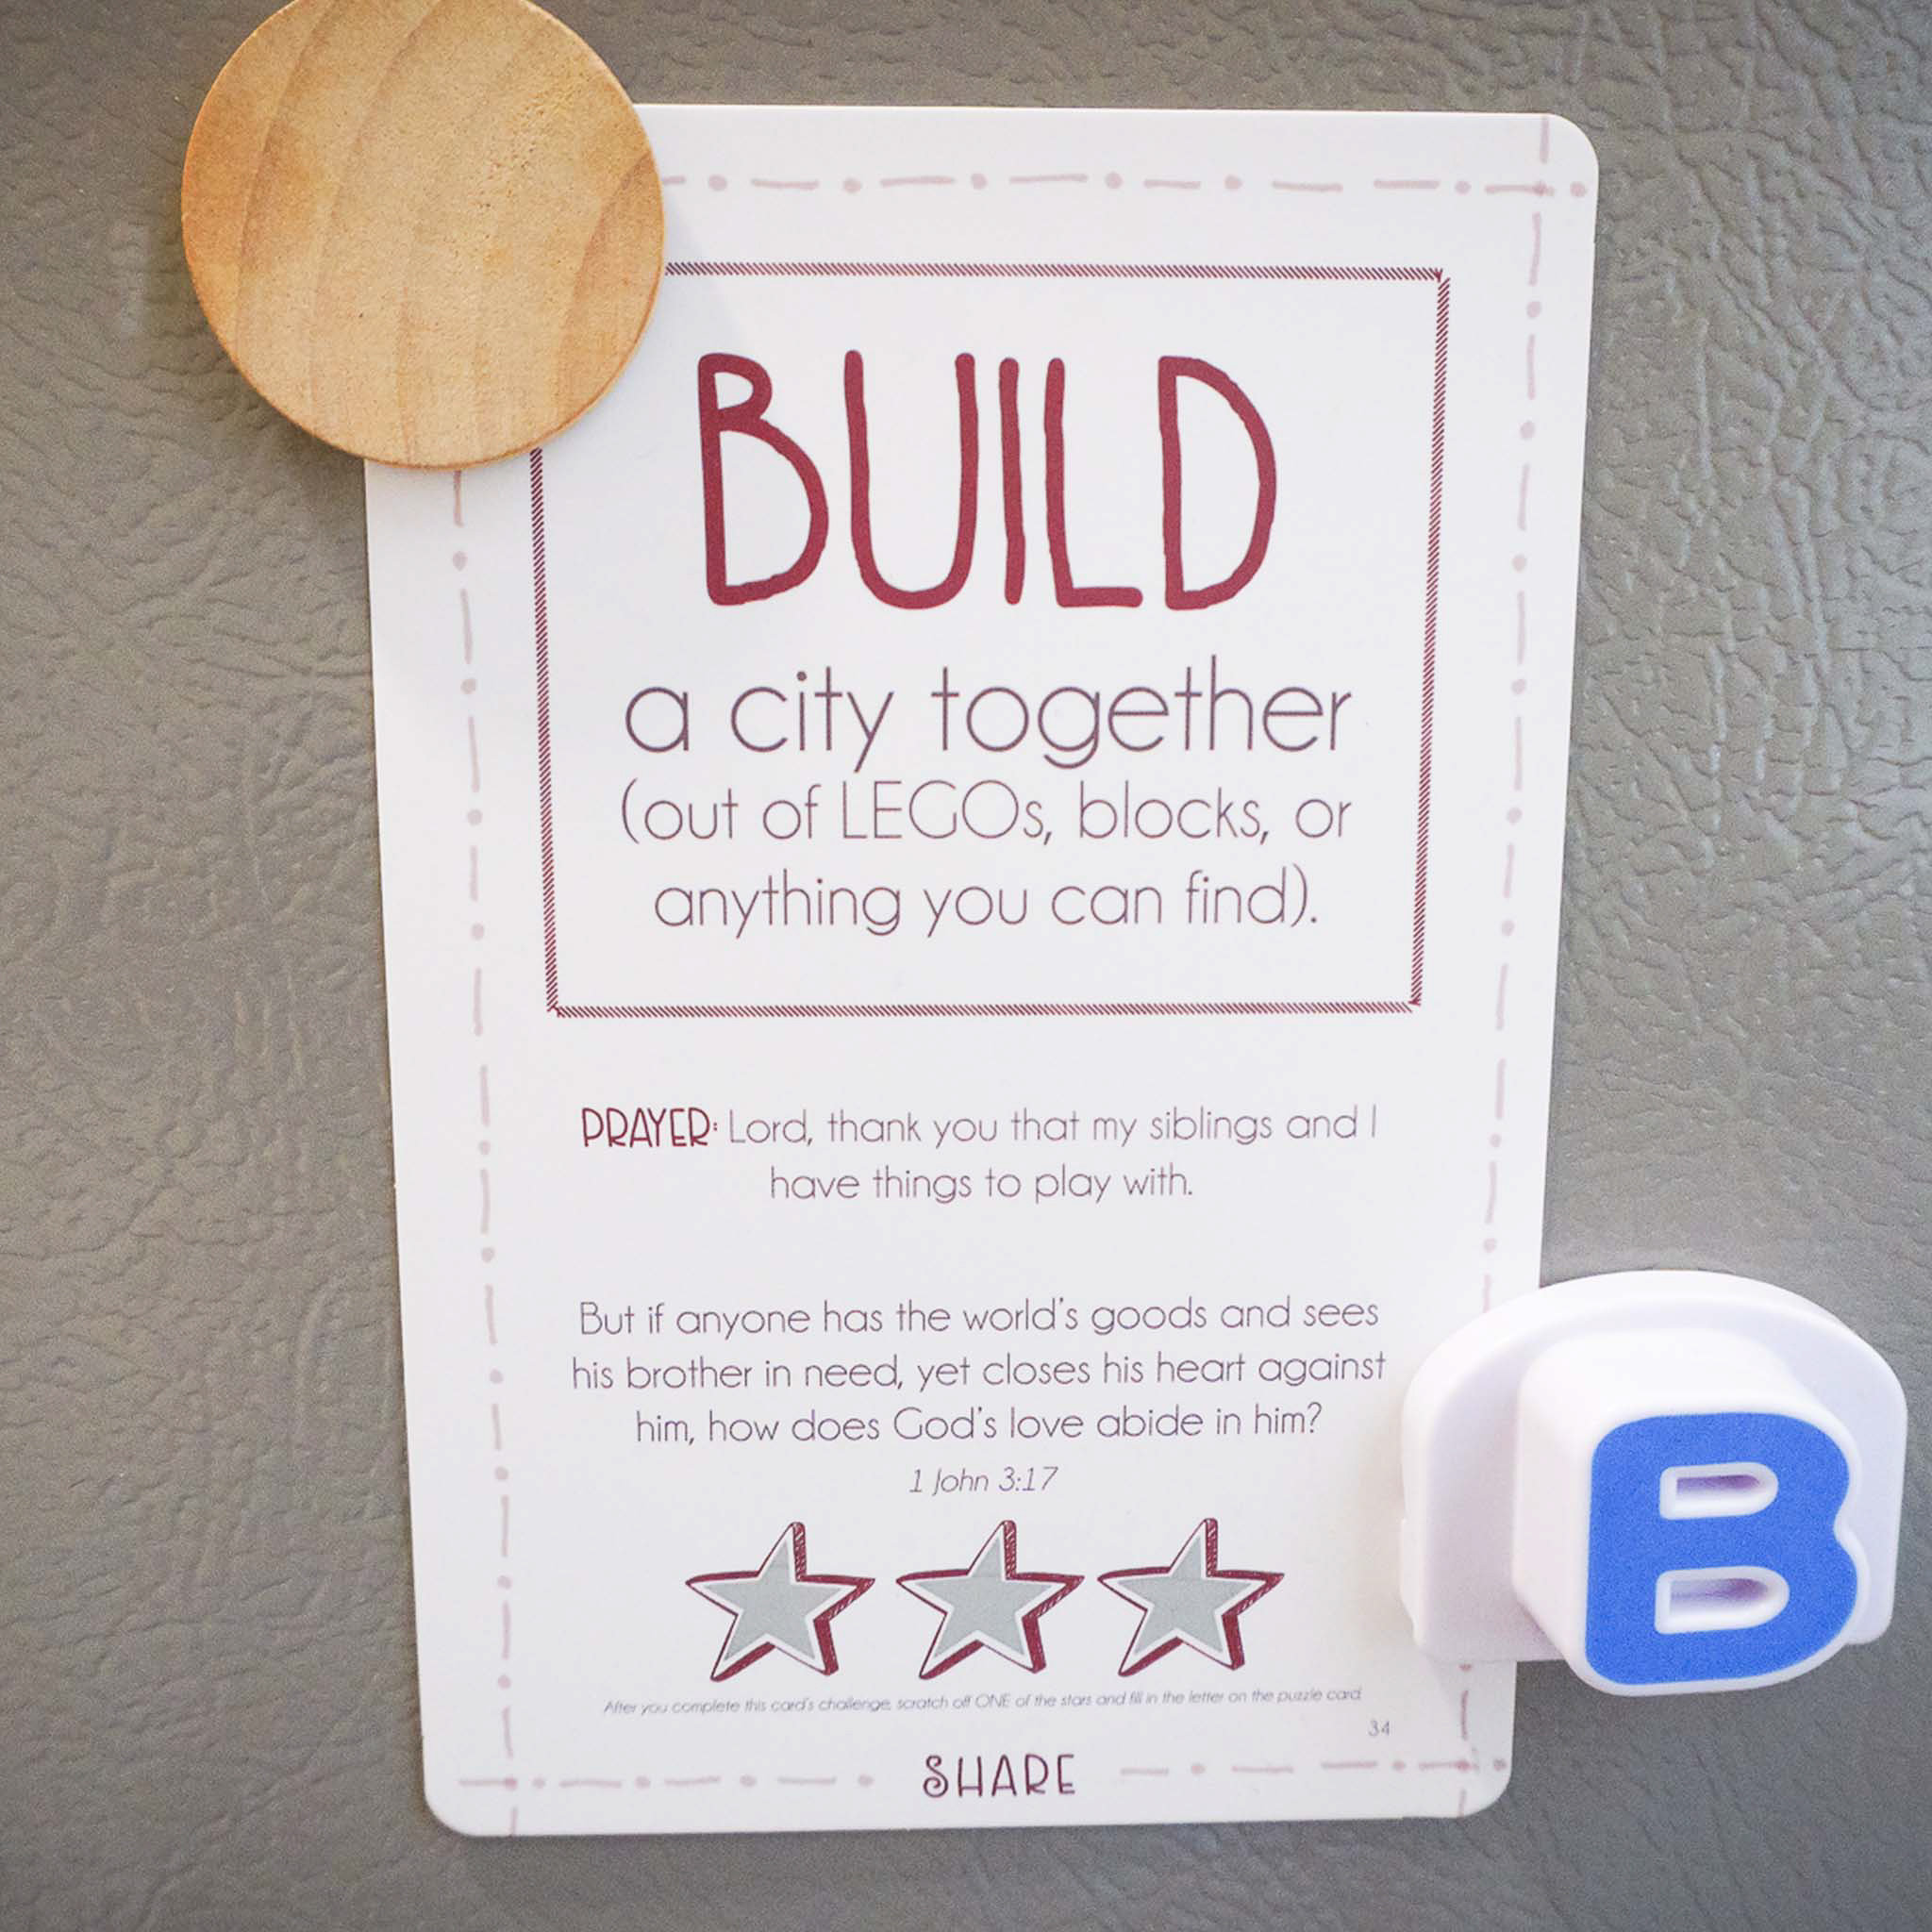 Show kindness to siblings by building something together